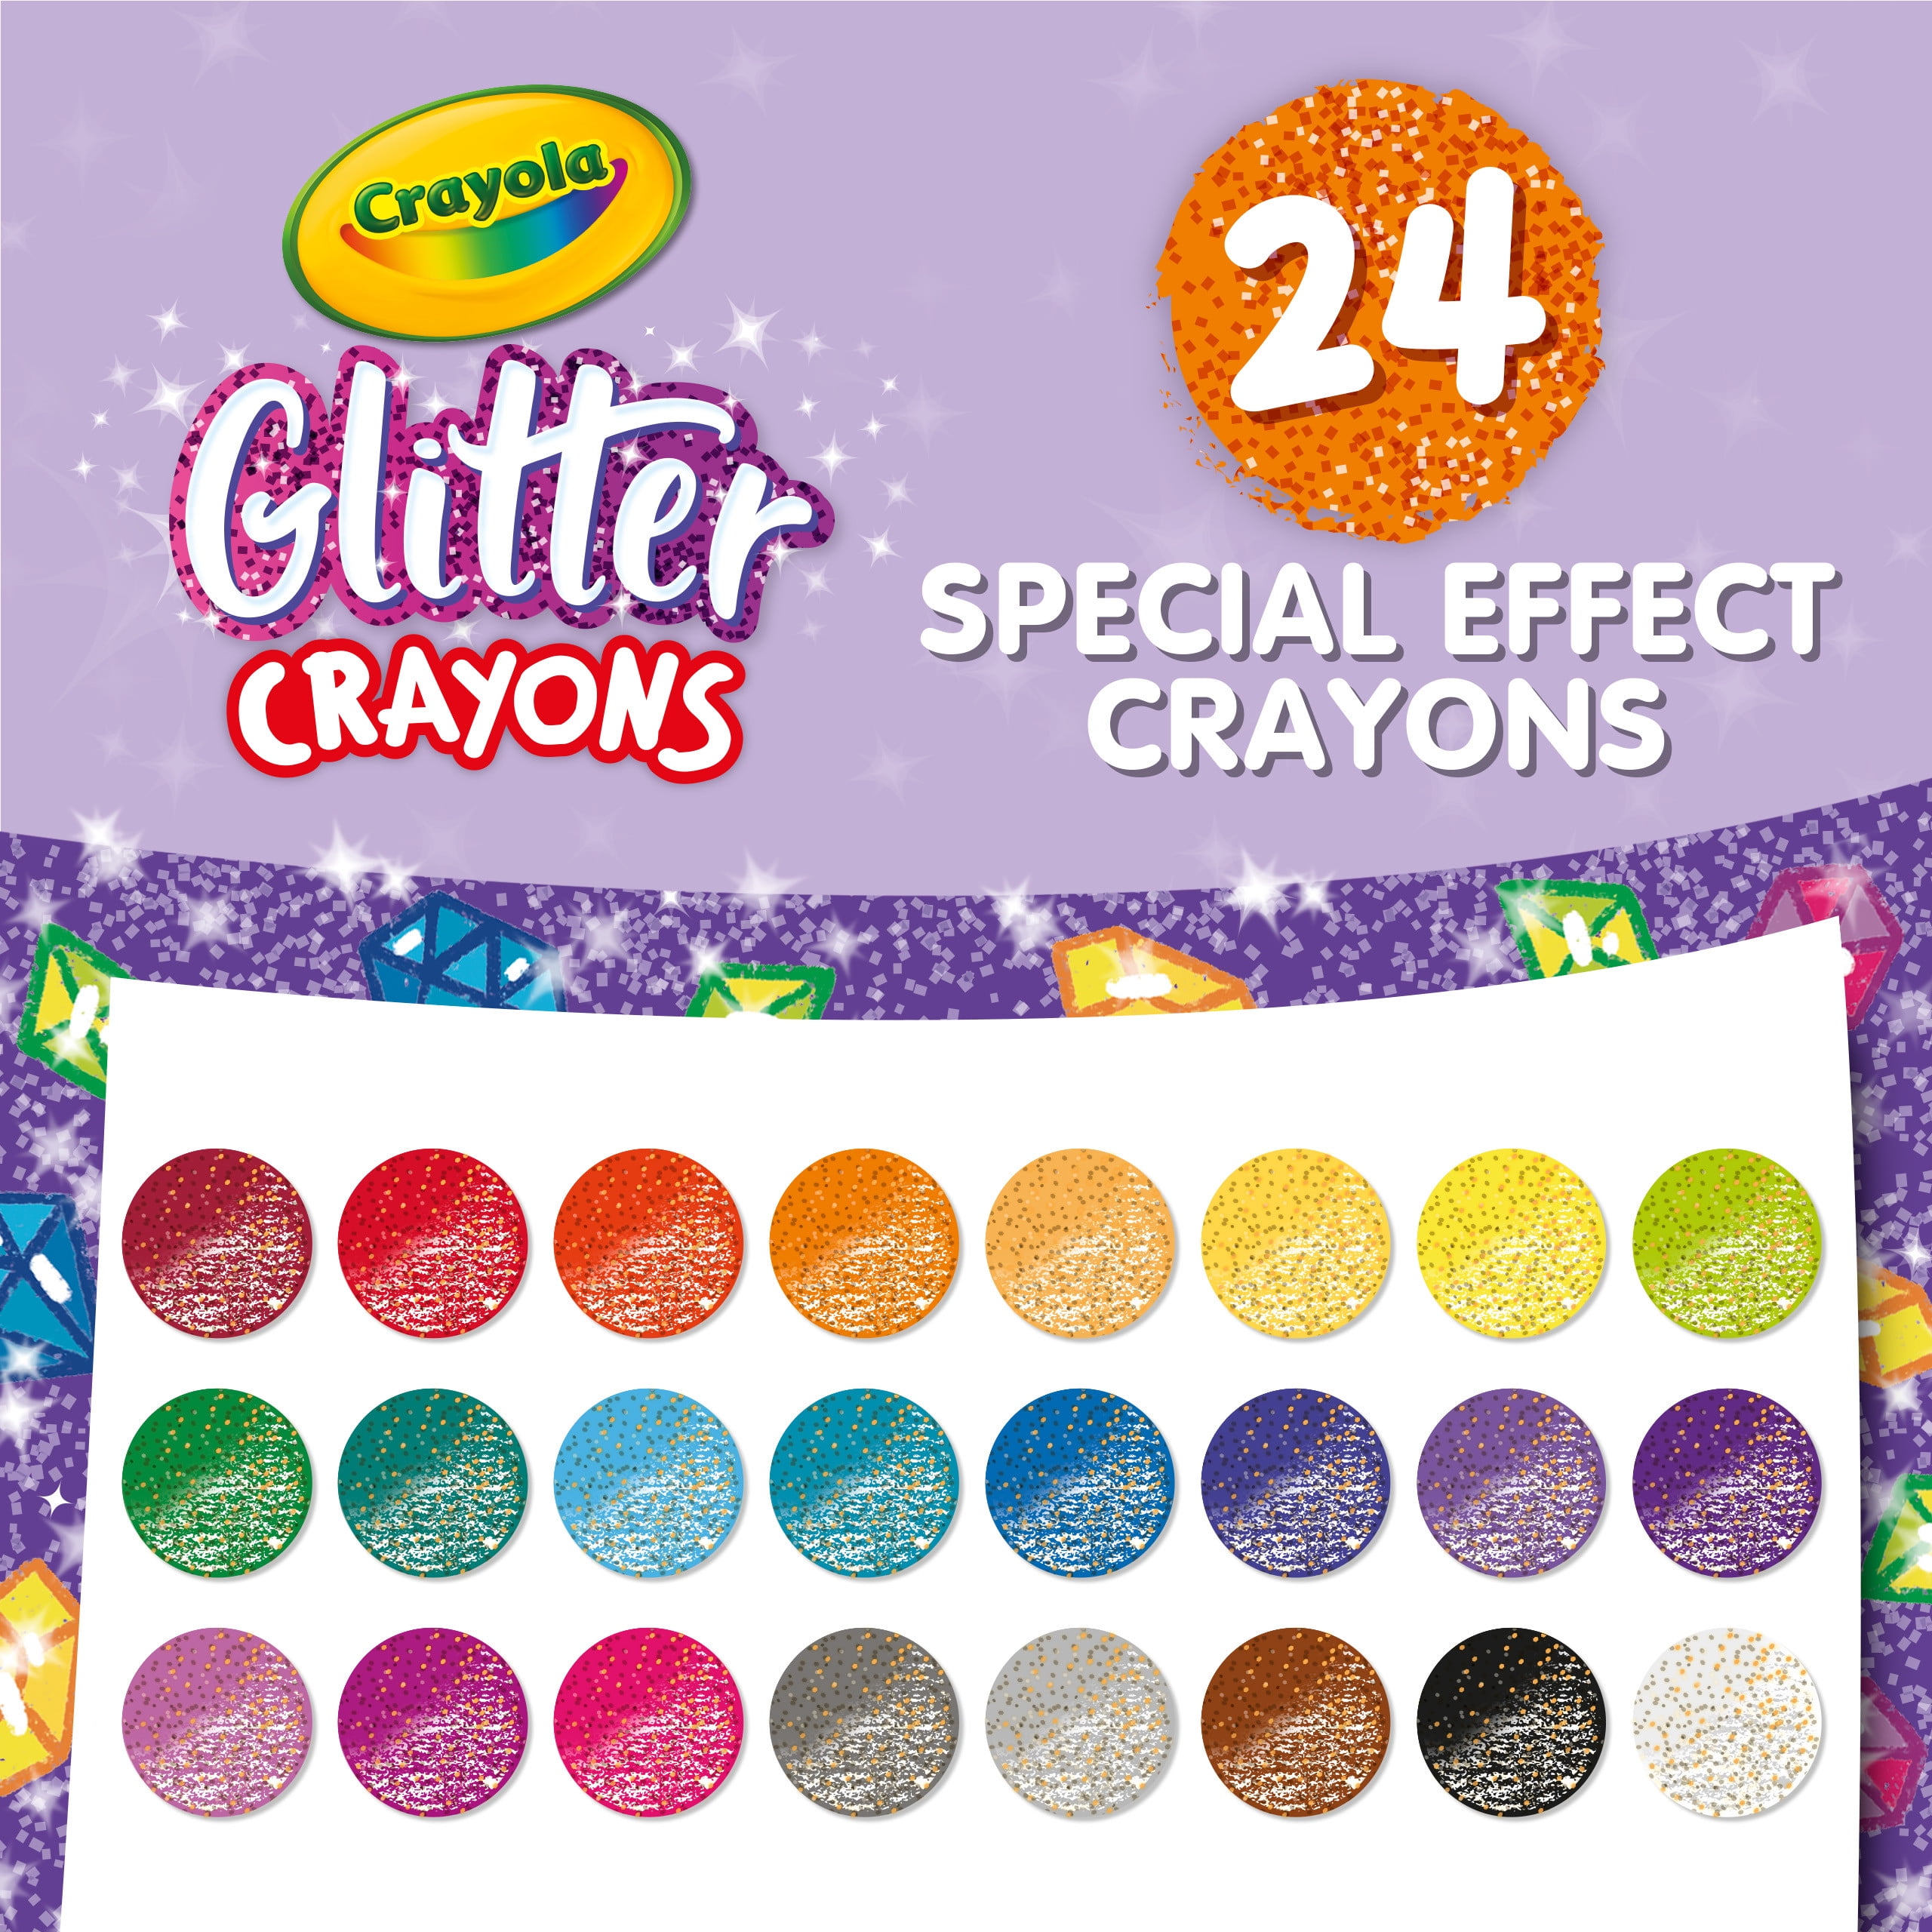 Buy Crayola Crayons, 24 Count, Glitter Crayons, 16 Count, Includes 5  Color Flag Set Online at Lowest Price Ever in India